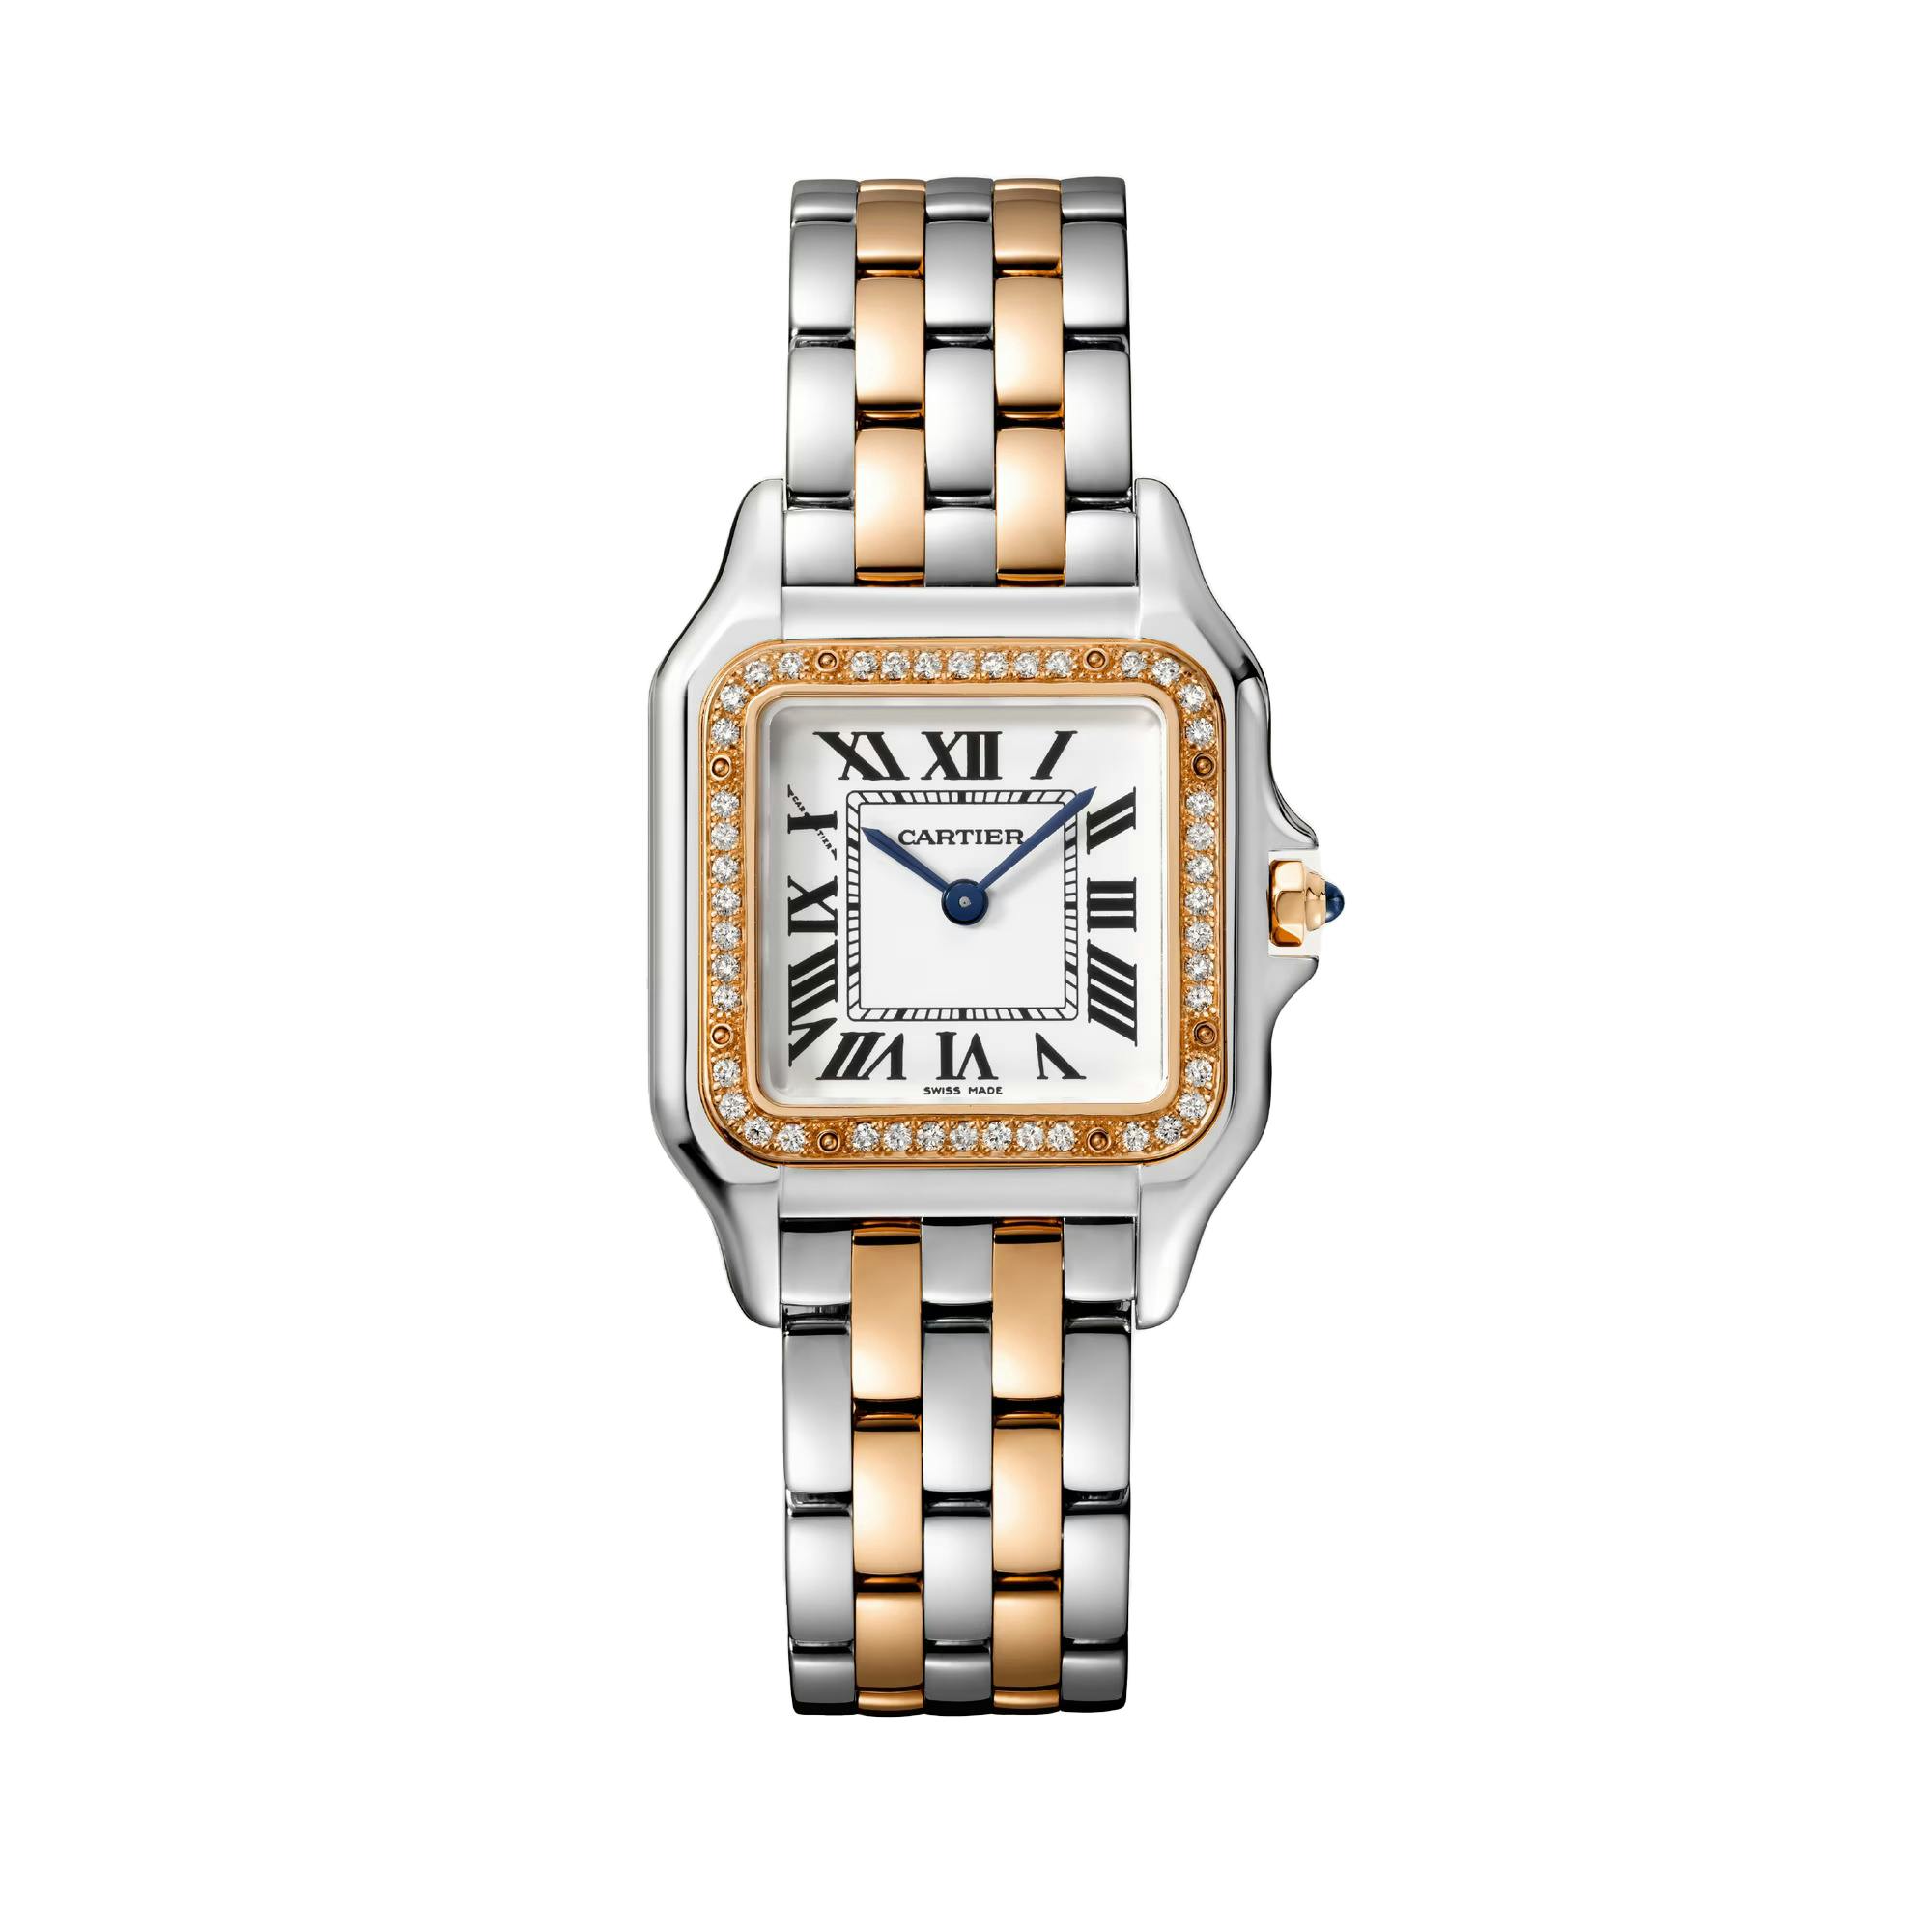 Panthere de Cartier Watch in Rose Gold with Diamonds